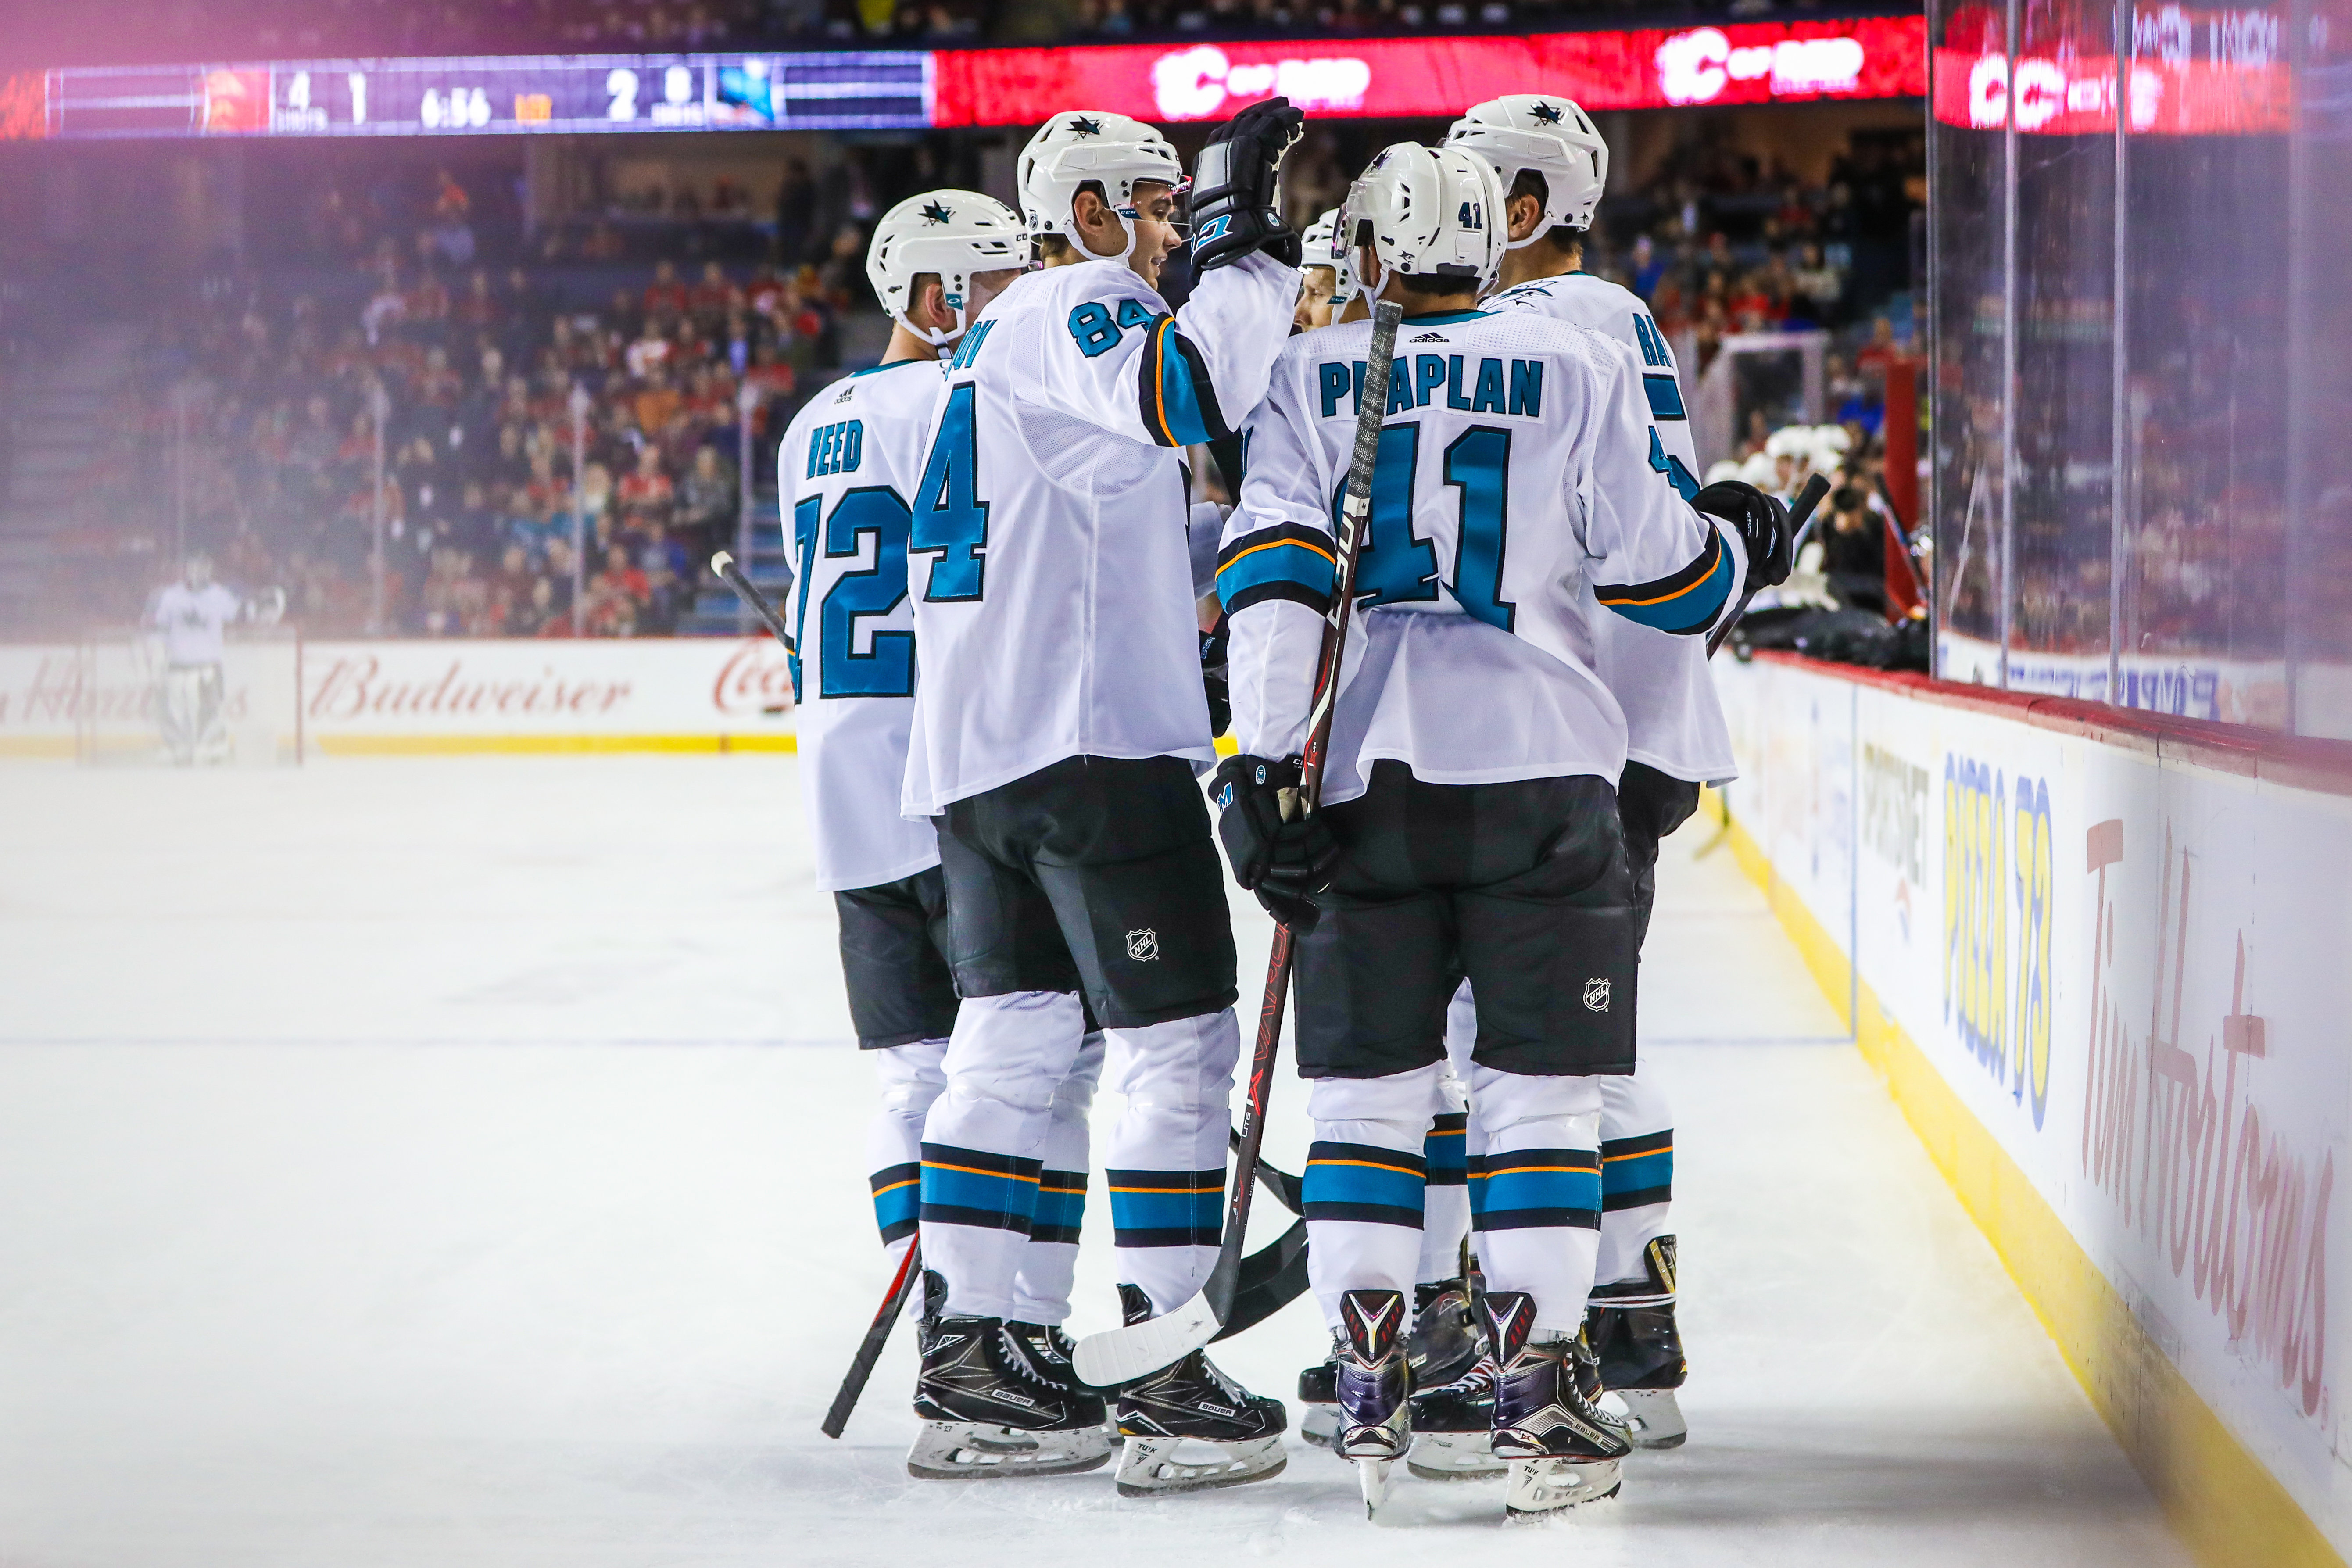 Sep 25, 2018; Calgary, Alberta, CAN; San Jose Sharks center Lukas Radil (52) celebrates his goal with teammates against the Calgary Flames during the first period at Scotiabank Saddledome.